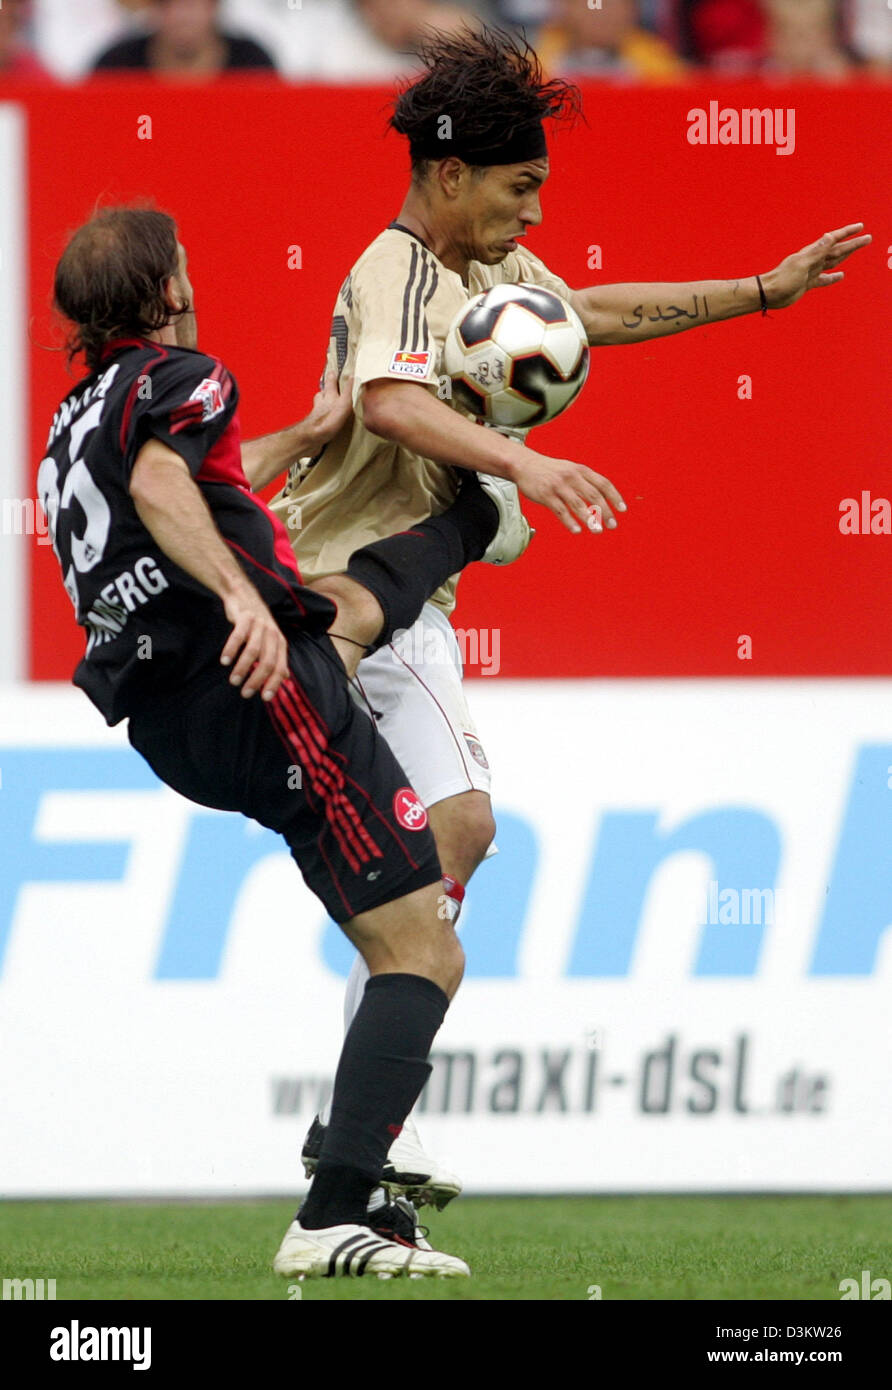 (dpa) - Nuremberg's Javier Horacio Pinola (L) struggles for the ball with Munich's player Paolo Guerrero  in the Bundesliga soccer match between 1st FC Nuernberg vs FC Bayern Munich at the Franken soccer stadium in Nuremberg, Germany, Saturday, 10 September 2005. (ATTENTION: New blocking period! The German Soccer League (DFL) prohibits the publication and further use of the picture Stock Photo